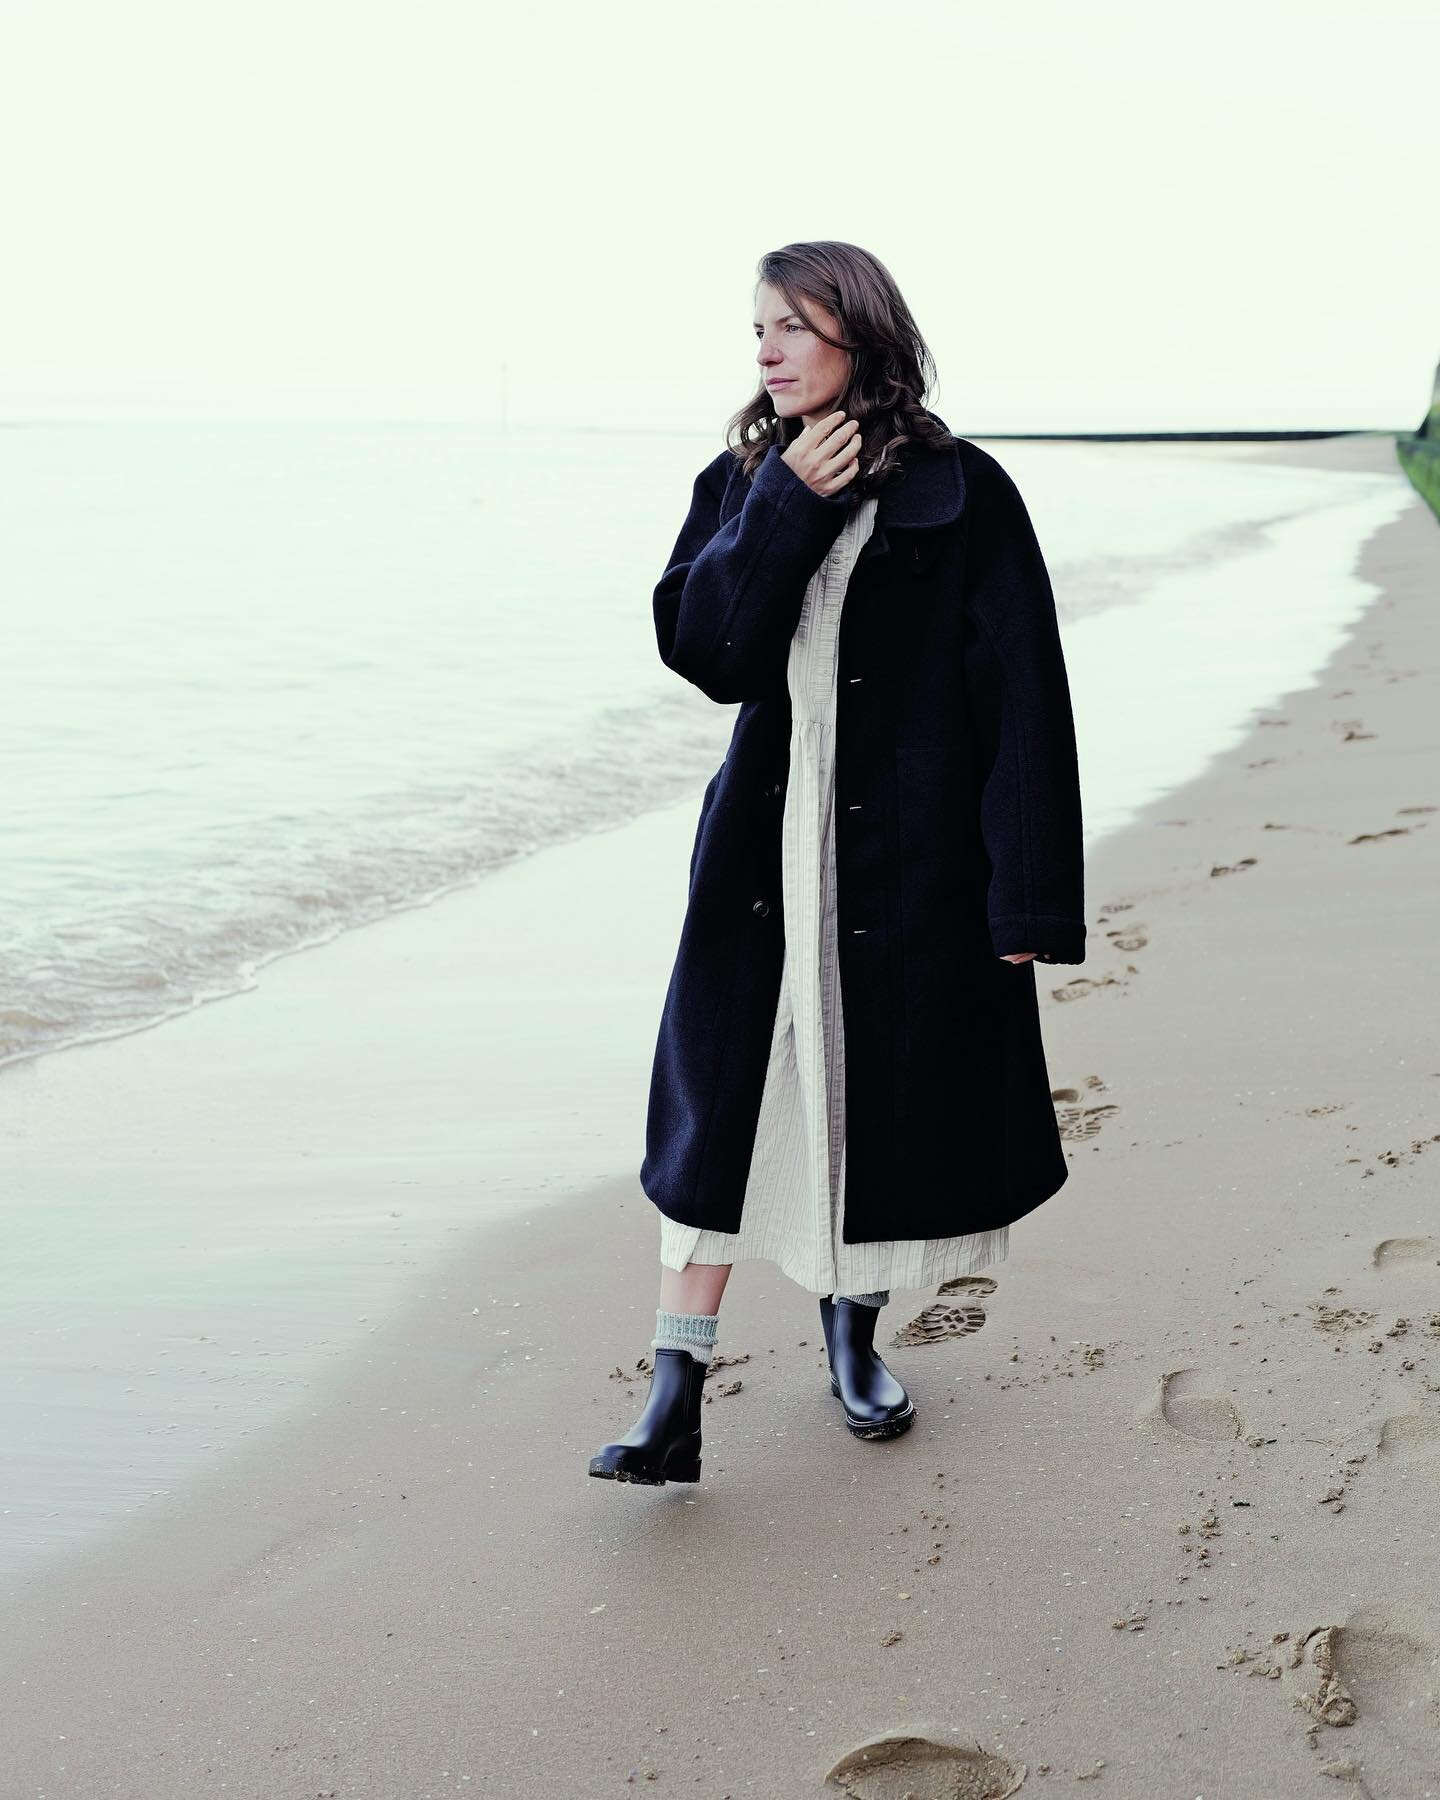 Beach walks to wrap up for. Those are our favourite kind of walks. 

Amina wears:
Army Trench by G.o.D
Lydbrook Dress by Cawley Studio
Druppel boots by Tanta

#albionstores #beachwalks #autumnstyle #womenswear @girlsofdust @cawleystudio @tantarainwea